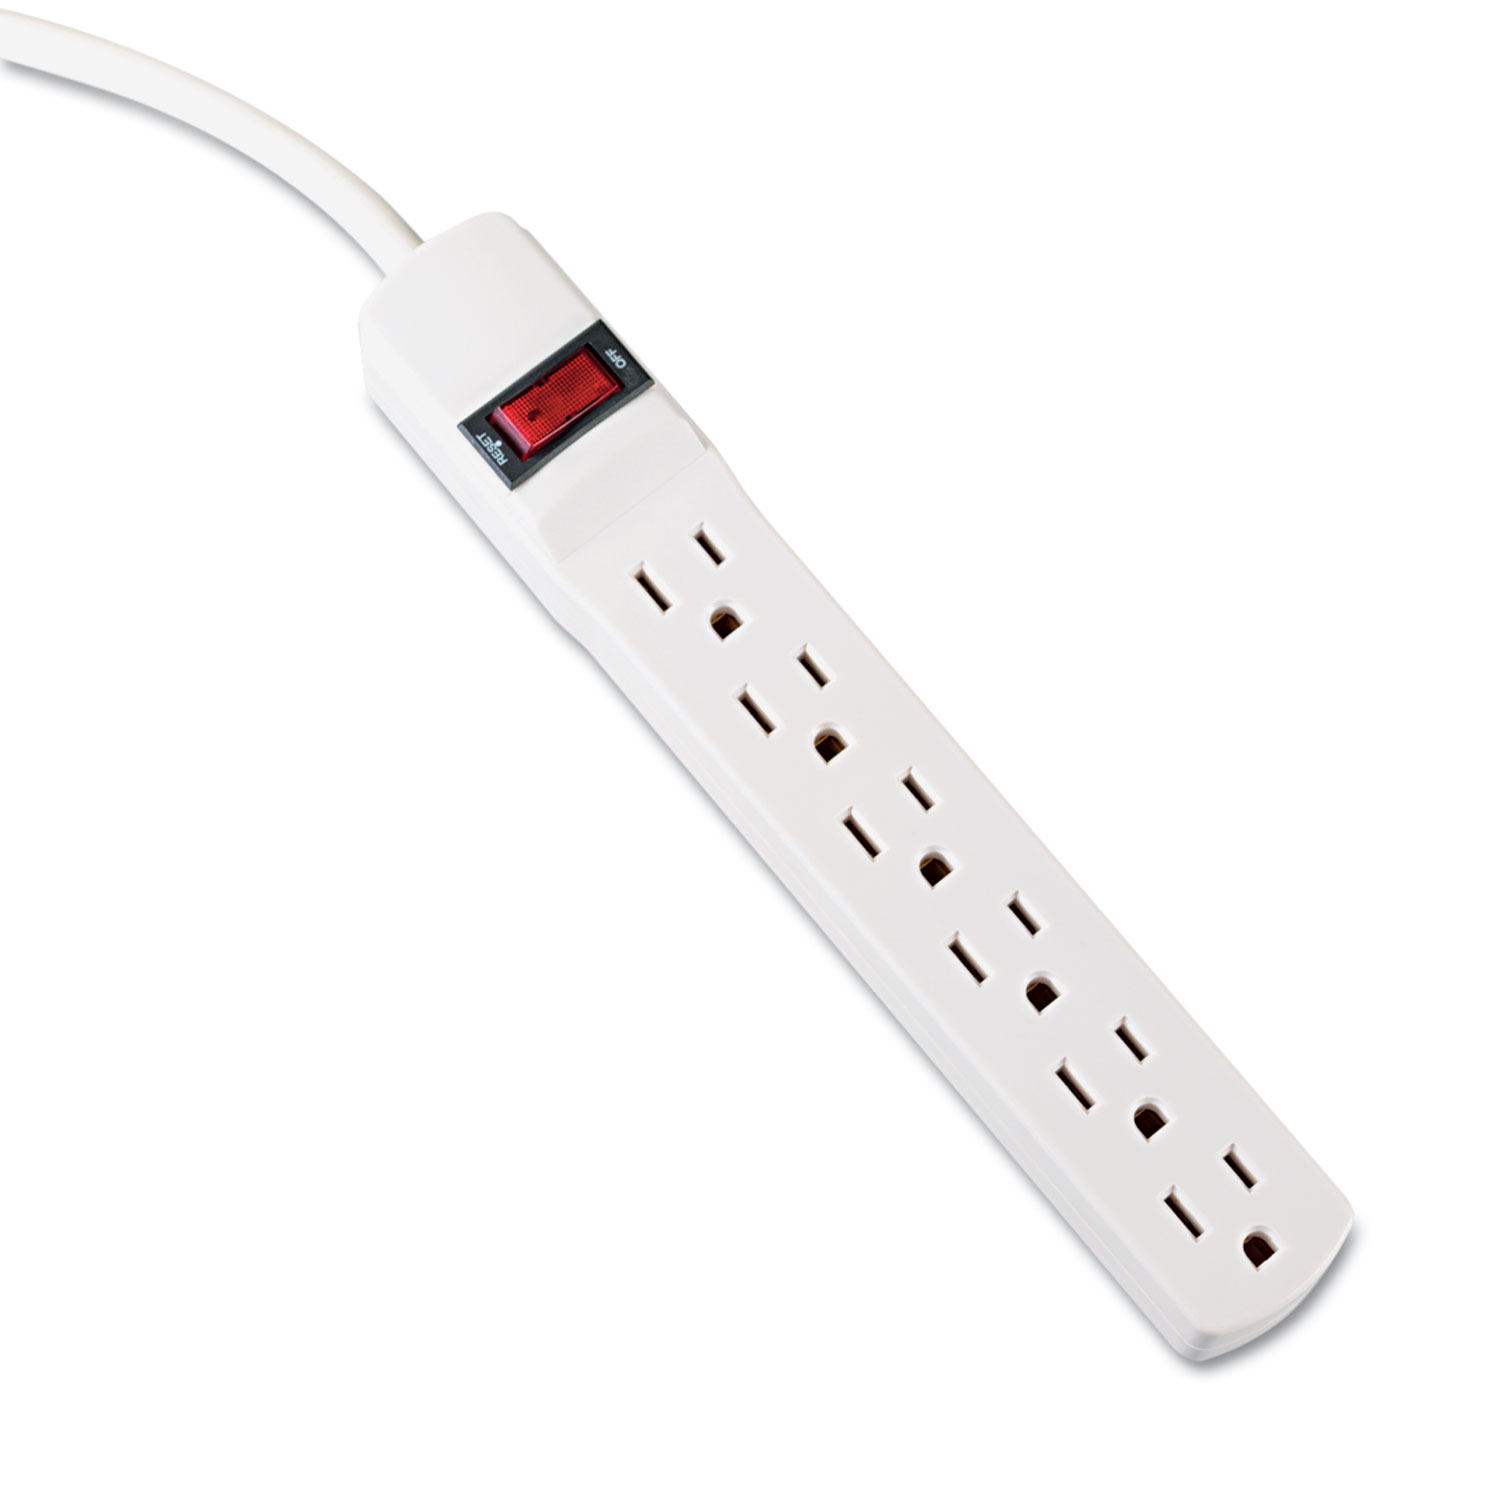 Black 10-Pack 6 Outlet Power Strip with 3 Foot Extension Cord 